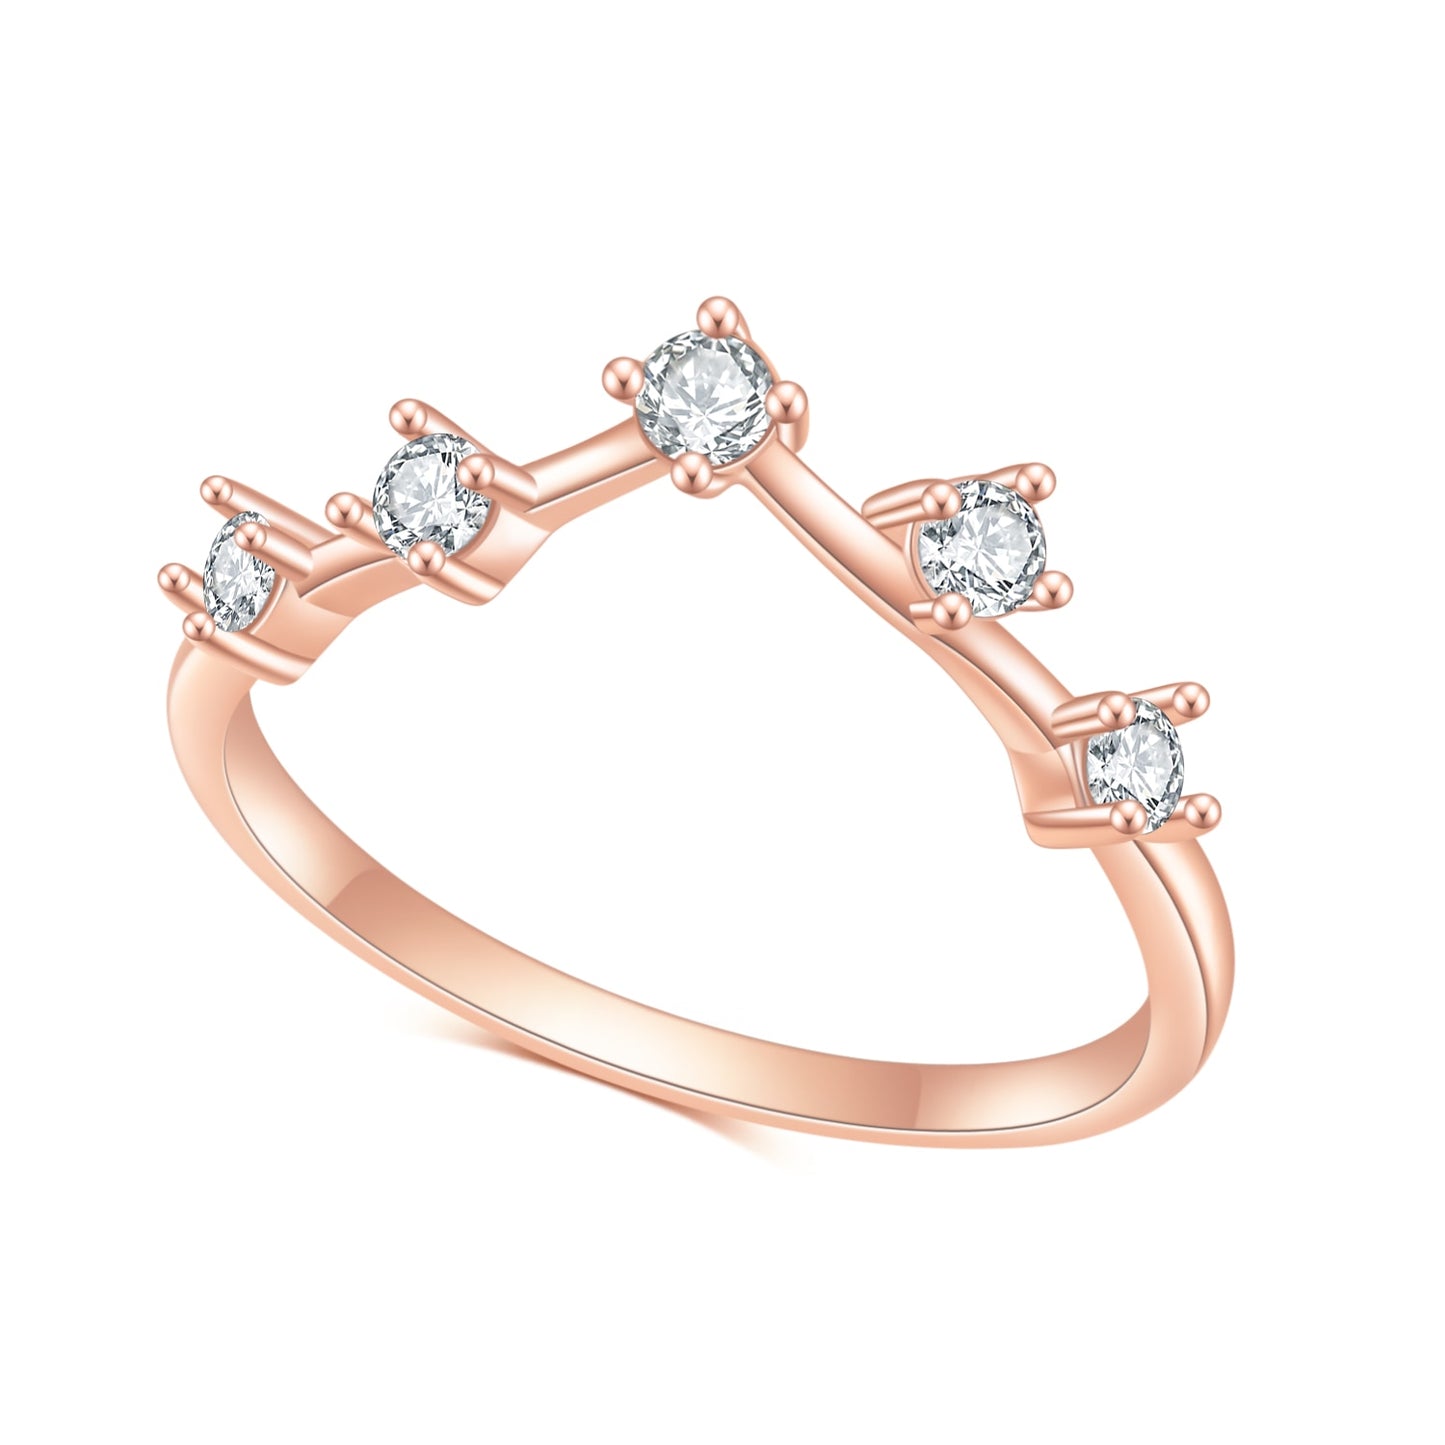 A rose gold chevron style wedding ring set with 5 small round spaced apart moissanites.